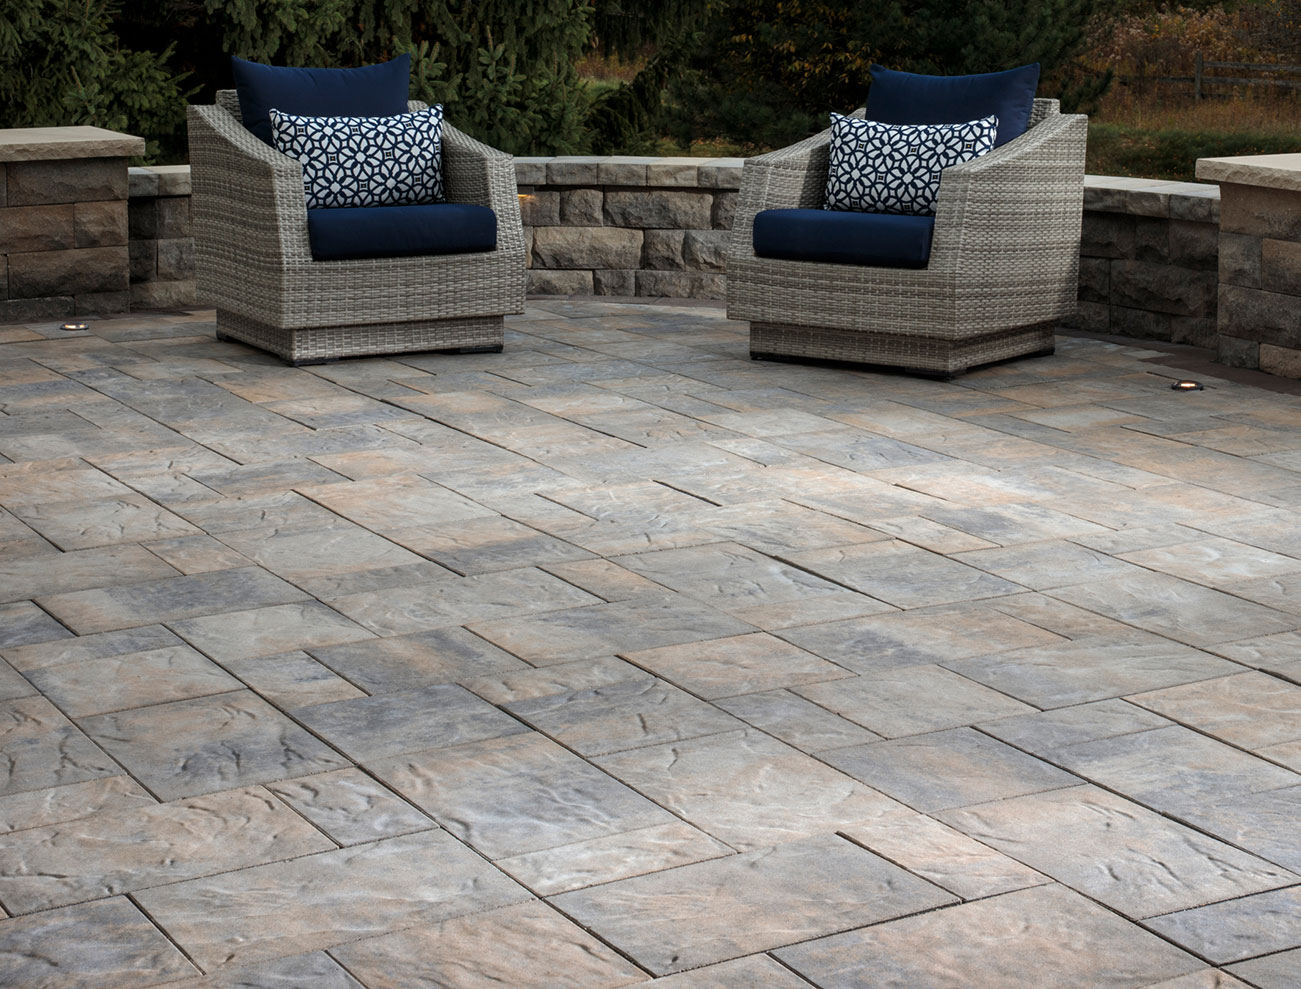 Belgard® Products - Check them out!